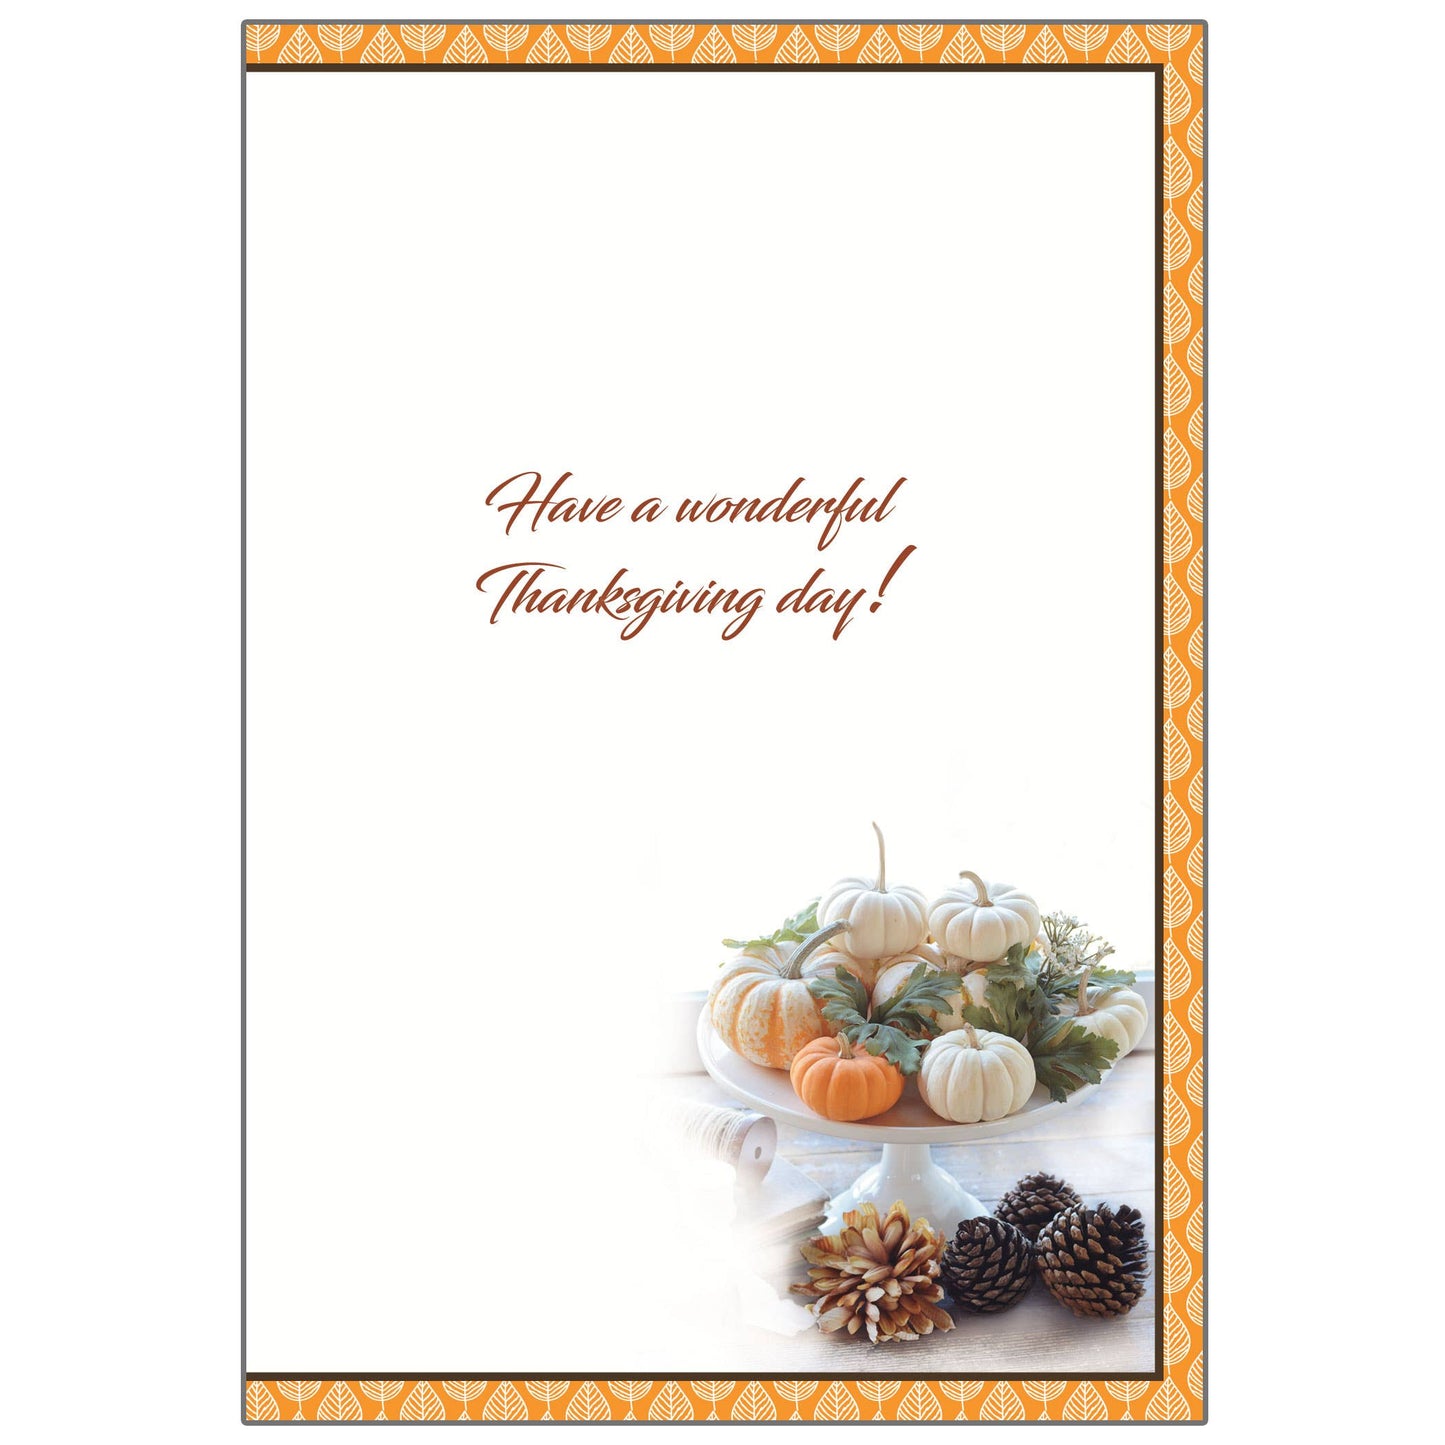 Pinecones with Gourds Thanksgiving Card